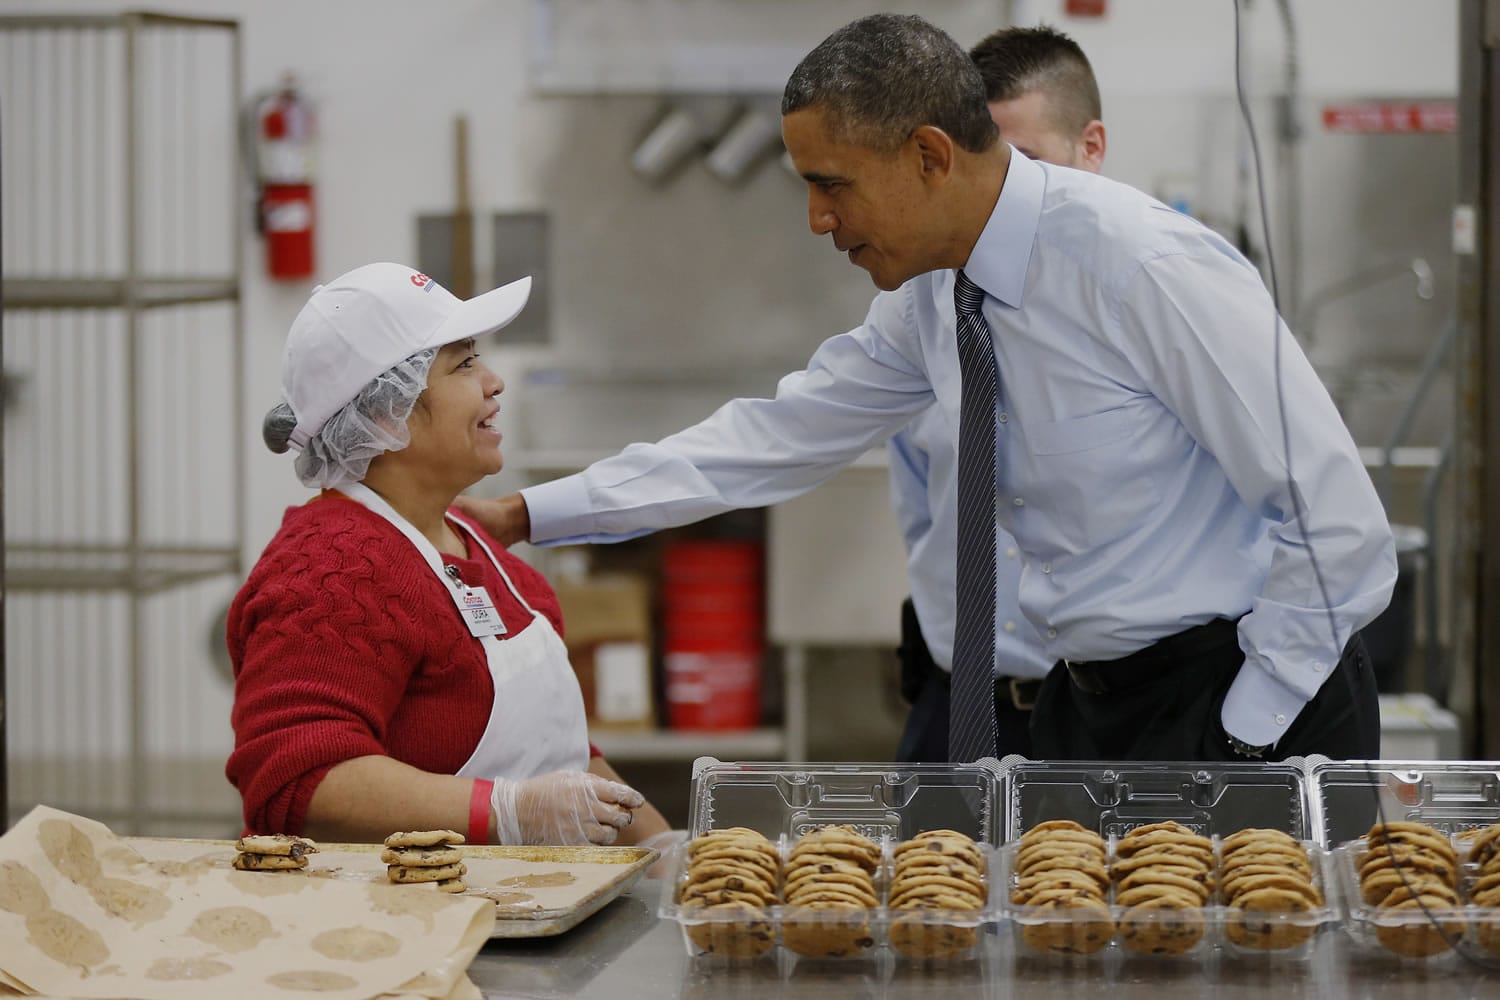 President Barack Obama greets an employee in the bakery at a Costco store Wednesday in Lanham, Md.